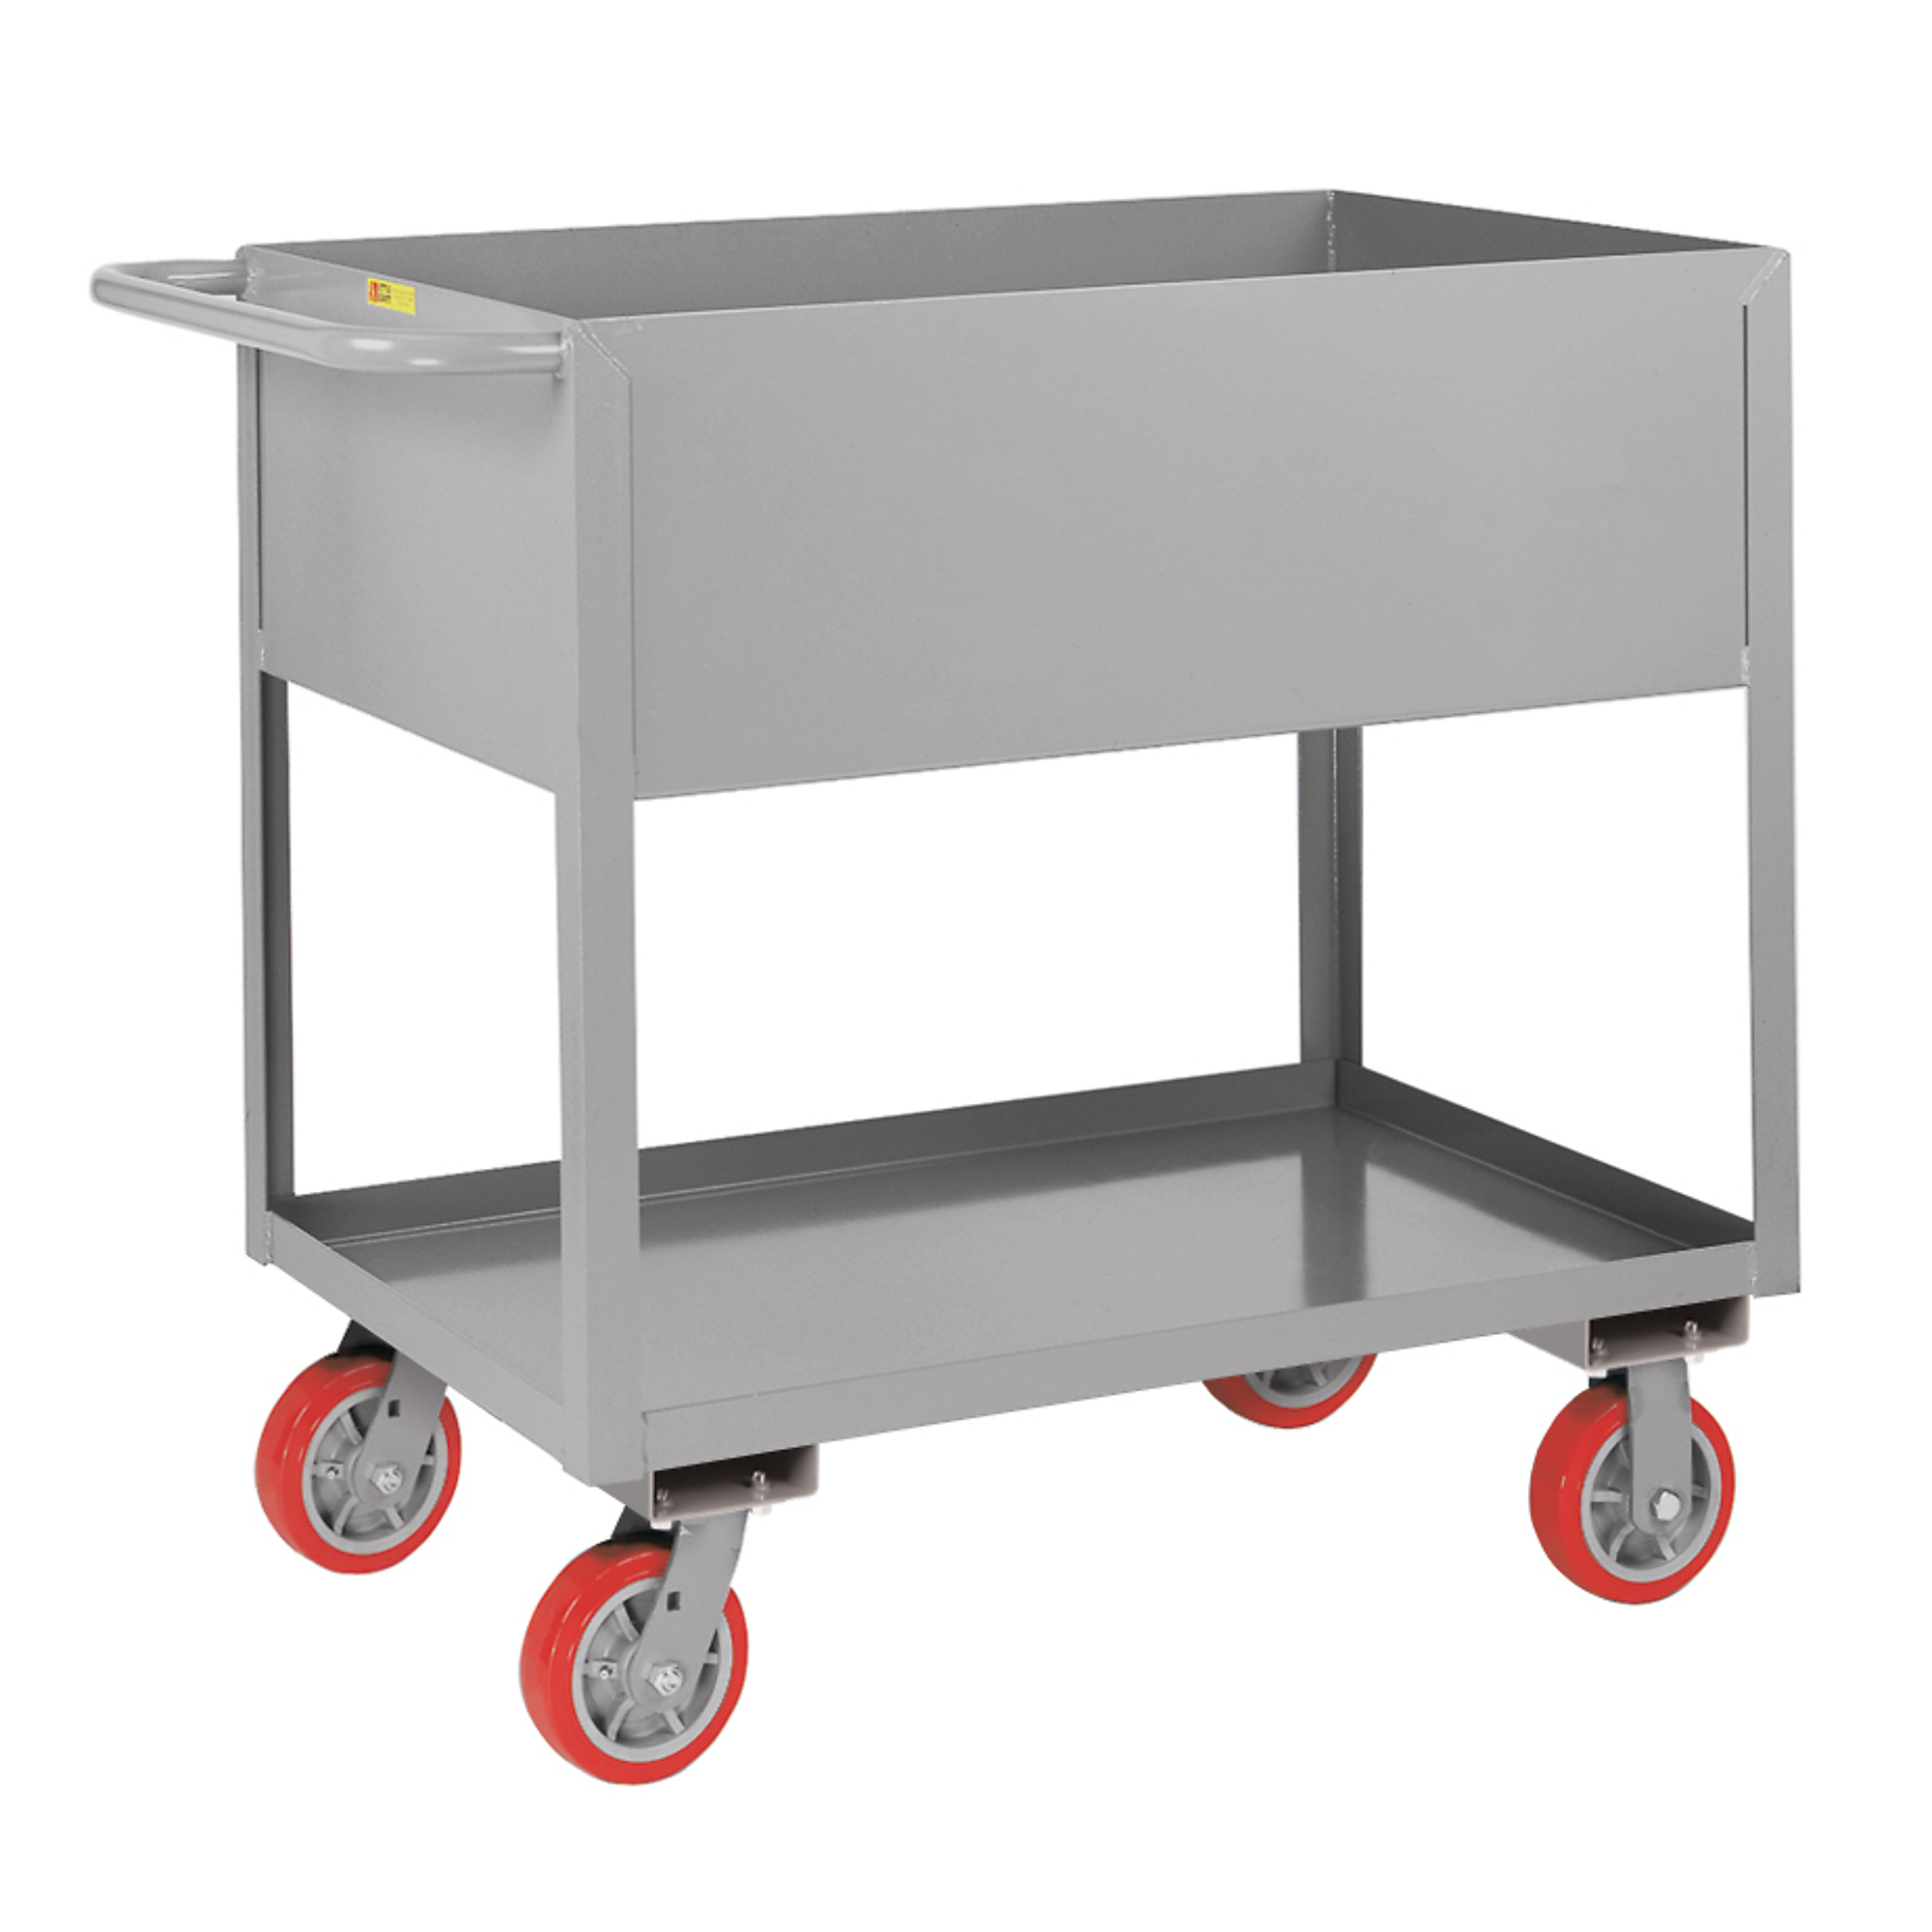 Little Giant, 12Inch Deep Shelf Truck, 24x36, 3600 lbs, Total Capacity 3600 lb, Shelves (qty.) 2, Material Carbon Steel, Model DS2436X12-6PY